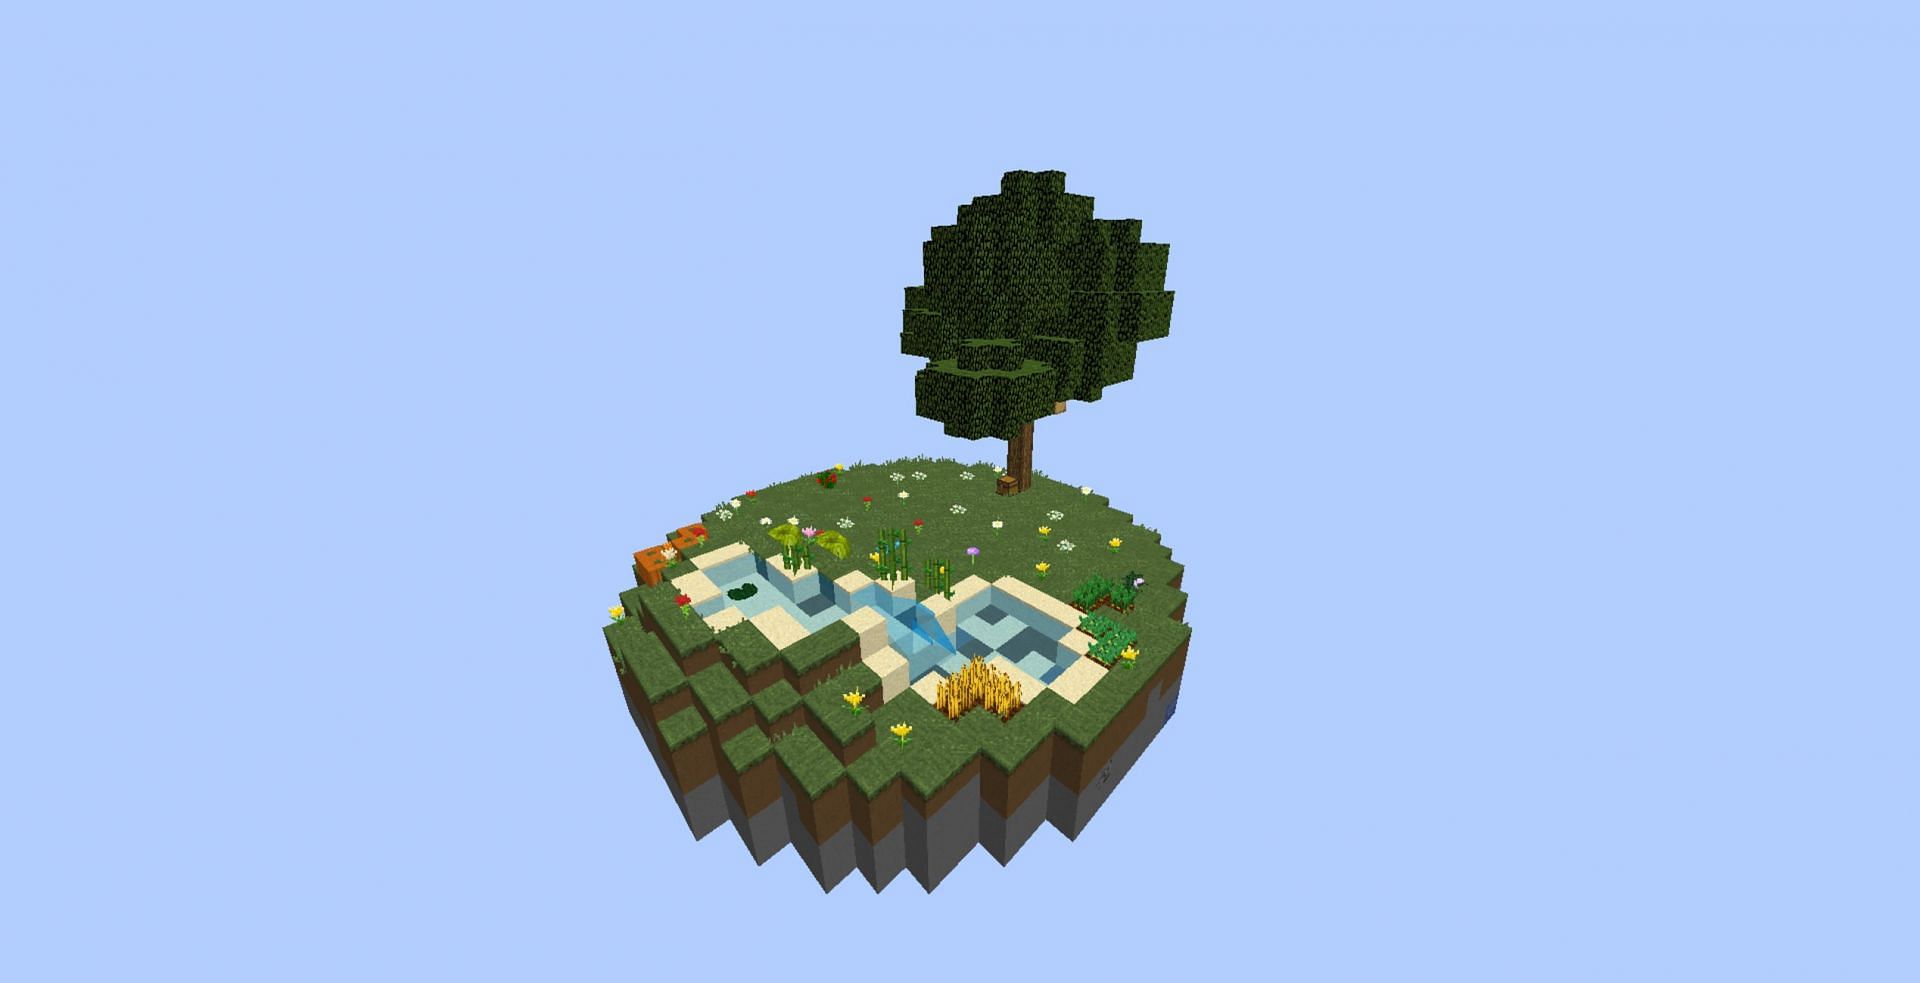 A one-layer Skyblock island from MineSuperior (Image via MineSuperior)